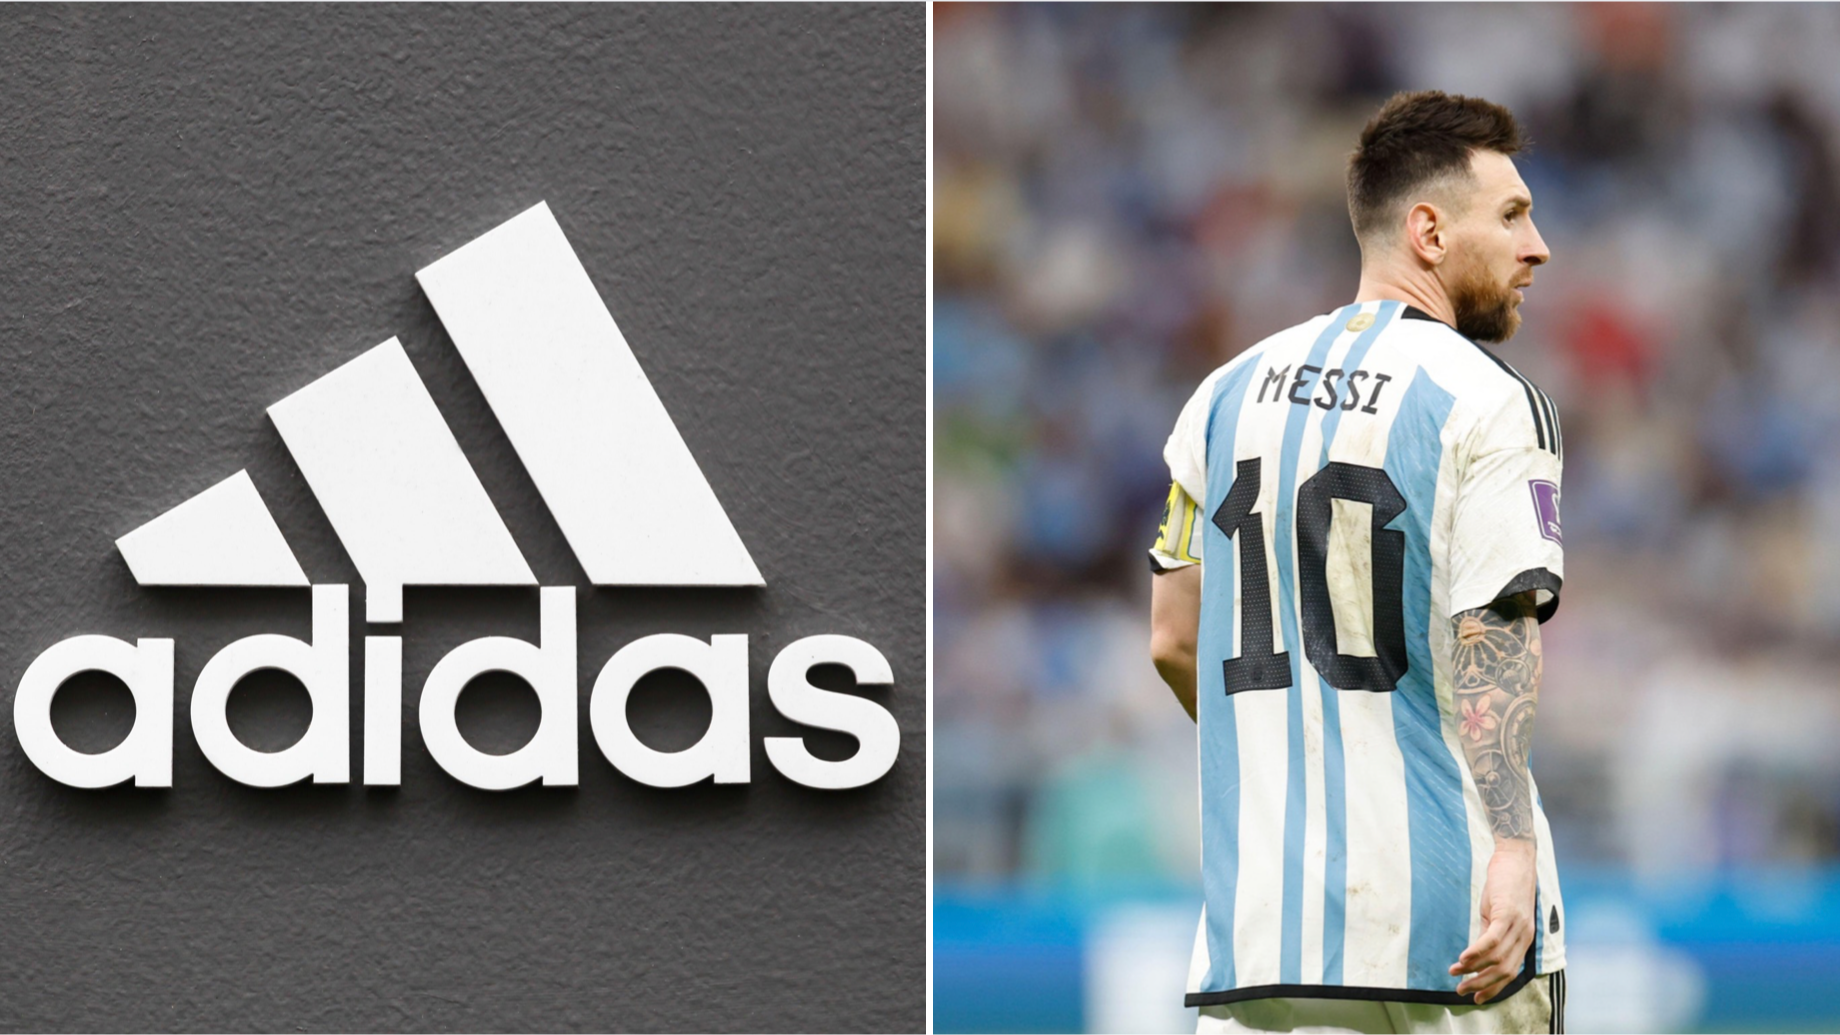 Adidas confirm all Messi Argentina shirts have sold out ahead of World Cup final